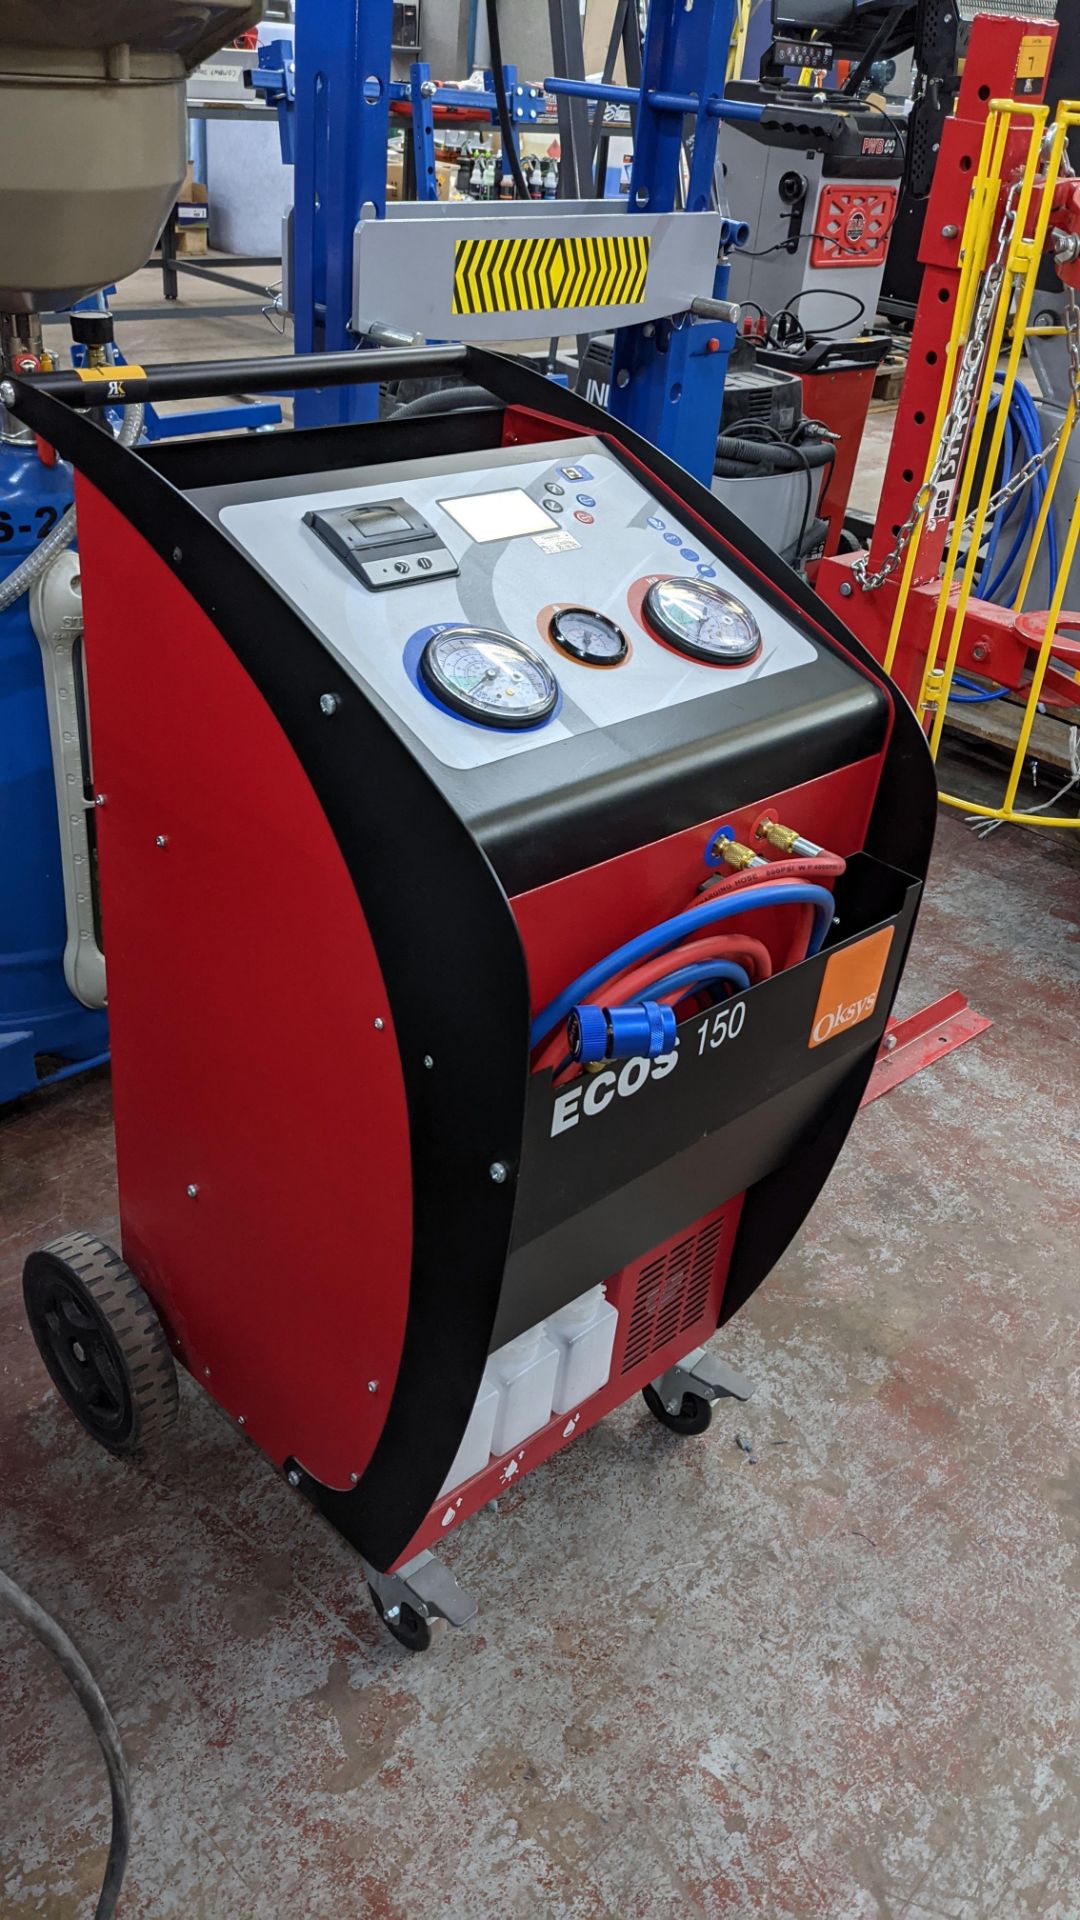 2018 Oksys ECOS 150LH air conditioning recharge system. Please note that the plaque on this machine - Image 5 of 11